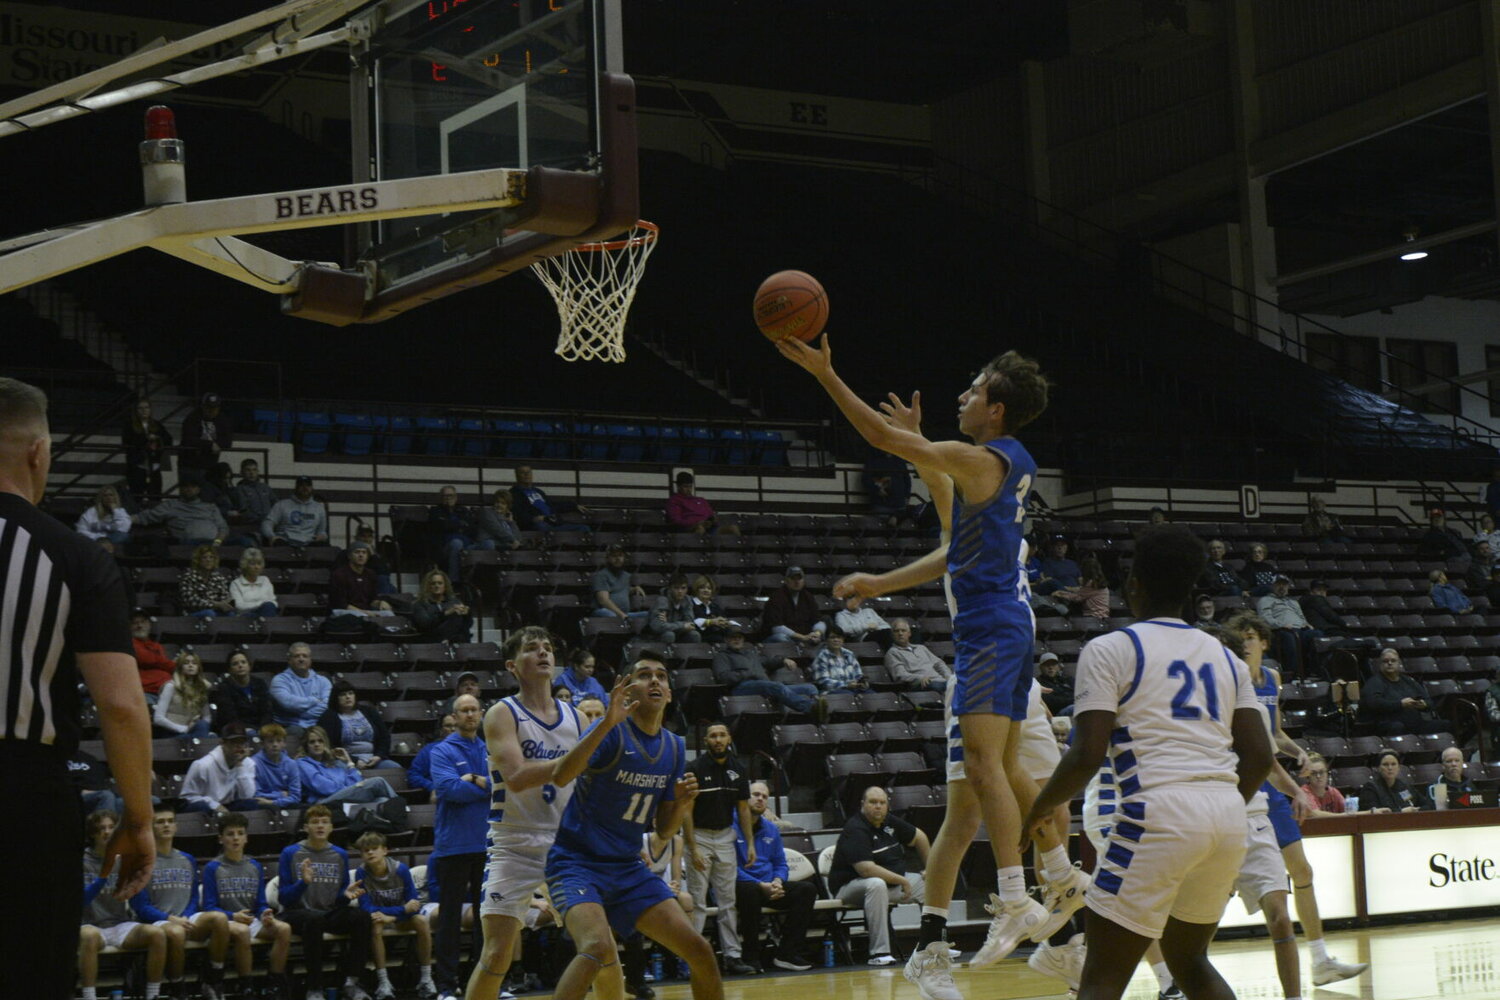 Senior Jackson Gardner with a finger roll finish at the rim against the Clever Bluejays on Thursday, Dec. 28